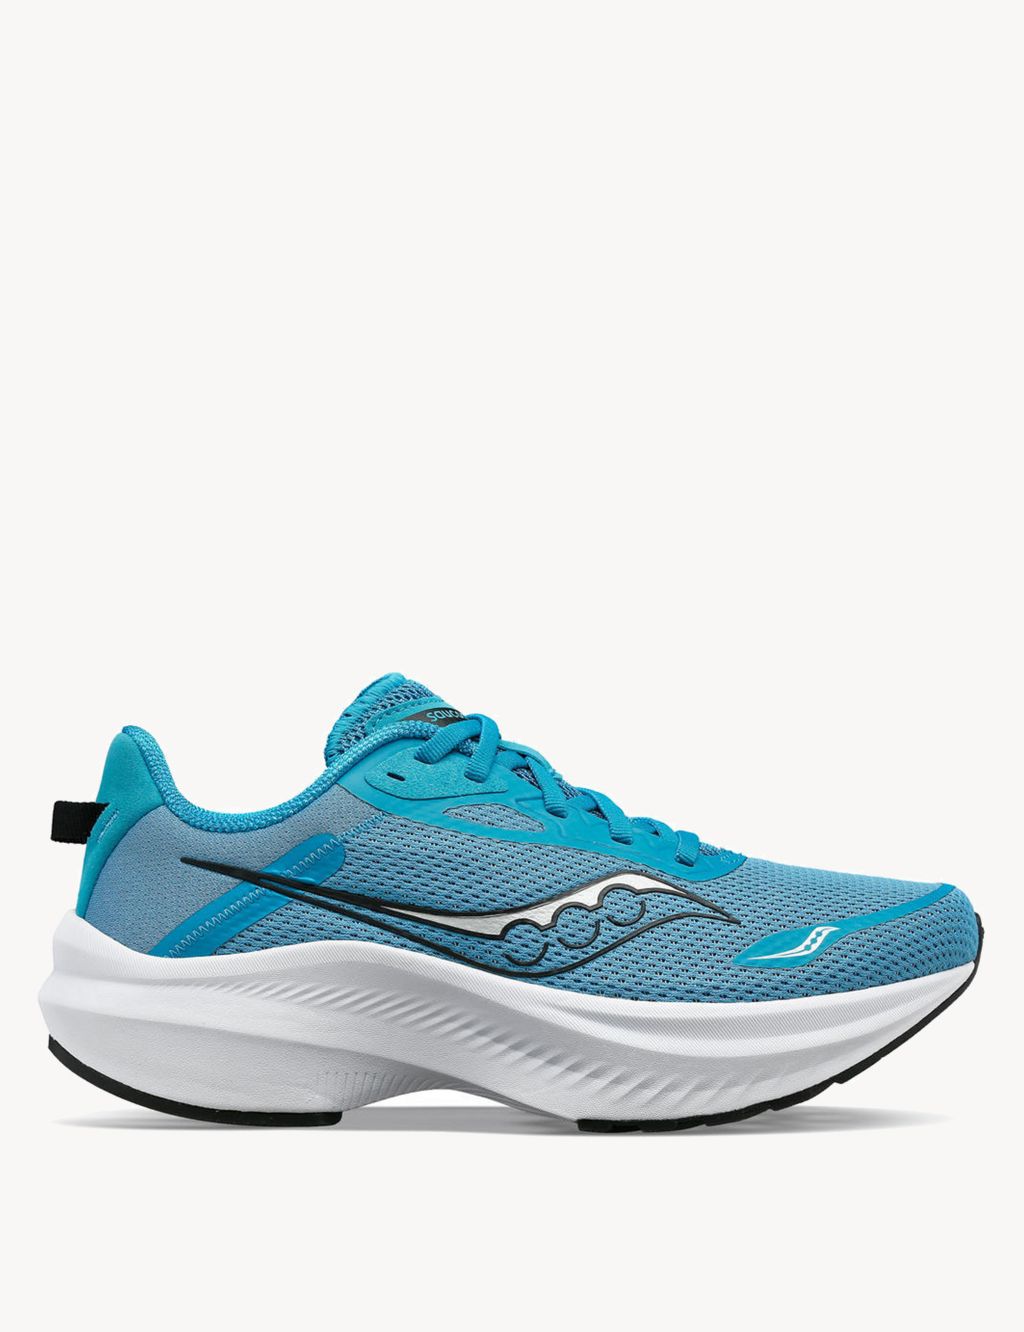 Axon 3 Trainers image 1